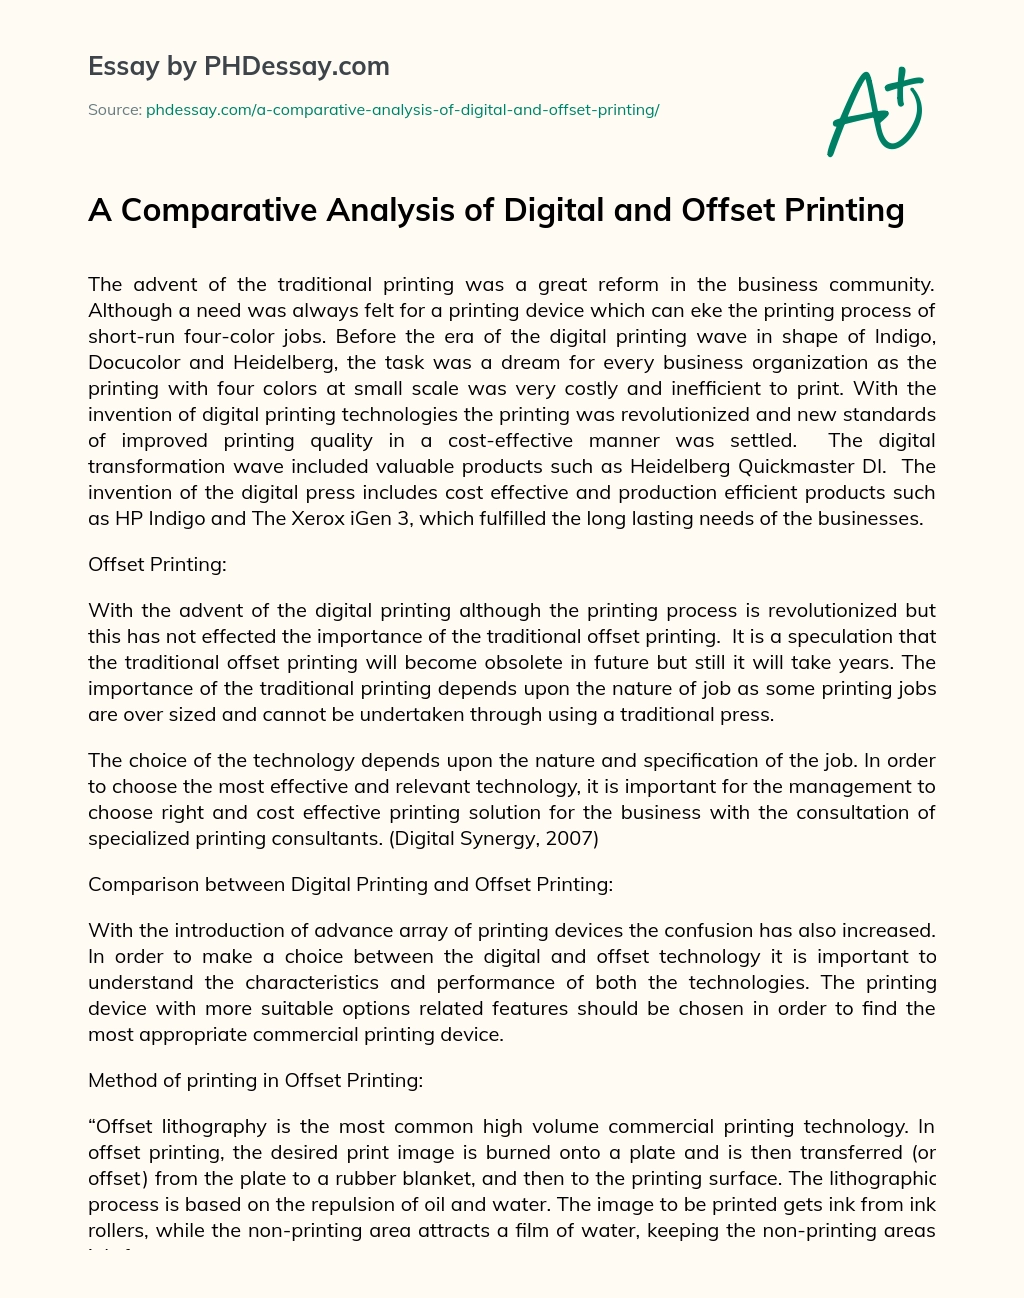 A Comparative Analysis of Digital and Offset Printing essay